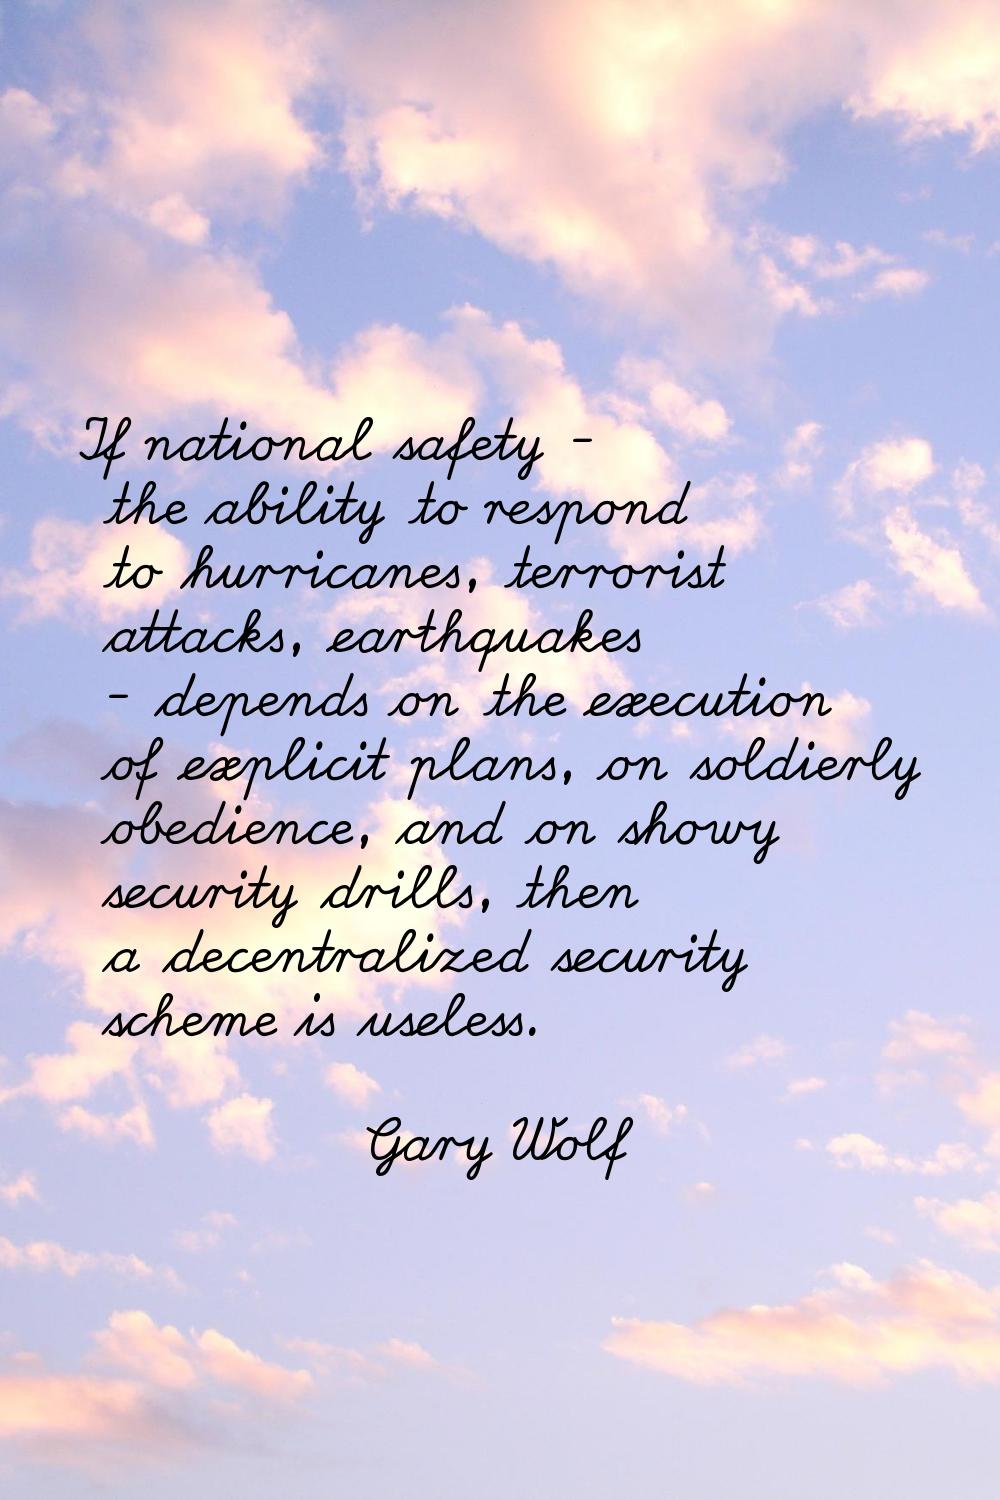 If national safety - the ability to respond to hurricanes, terrorist attacks, earthquakes - depends